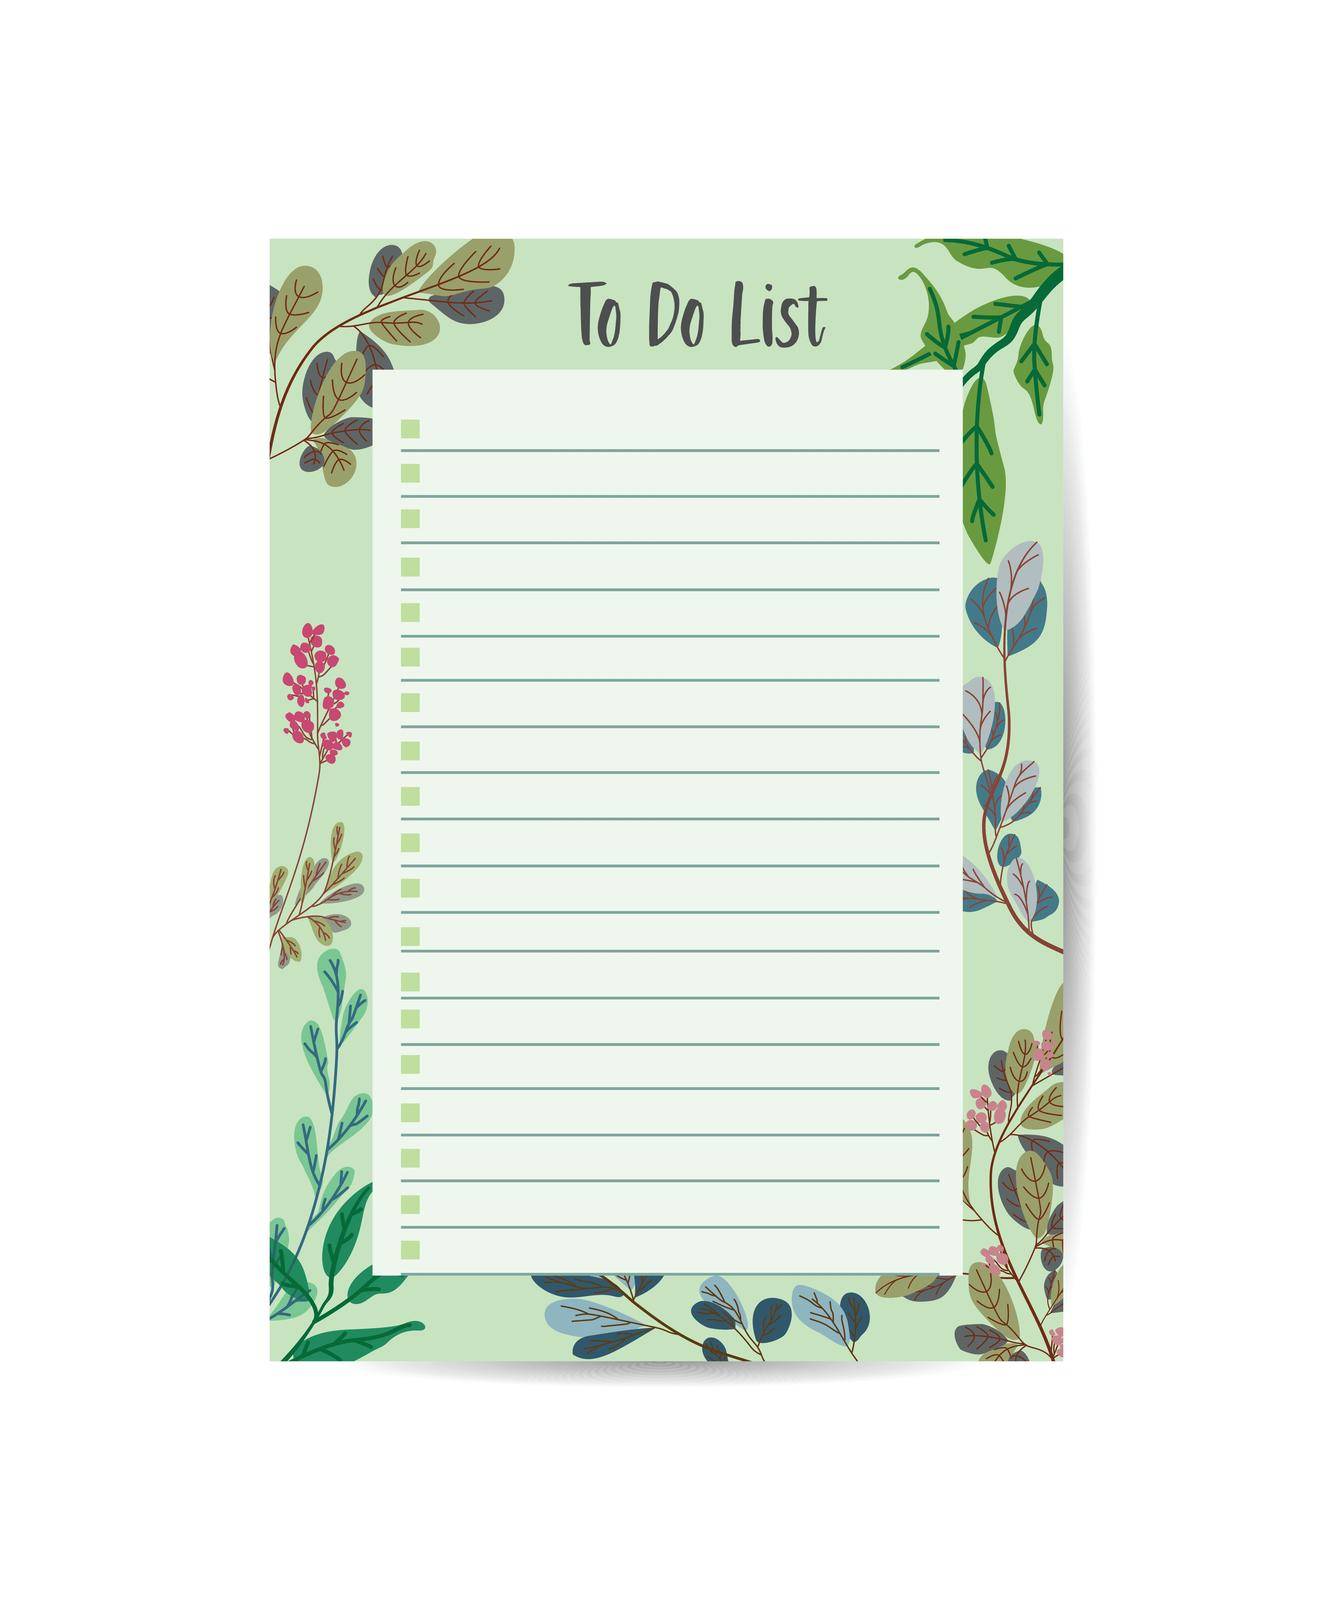 Trendy minimalist planner in pastel colors. For menu, to-do list. Template in textured hand-drawn style in pastel colors by ANITA